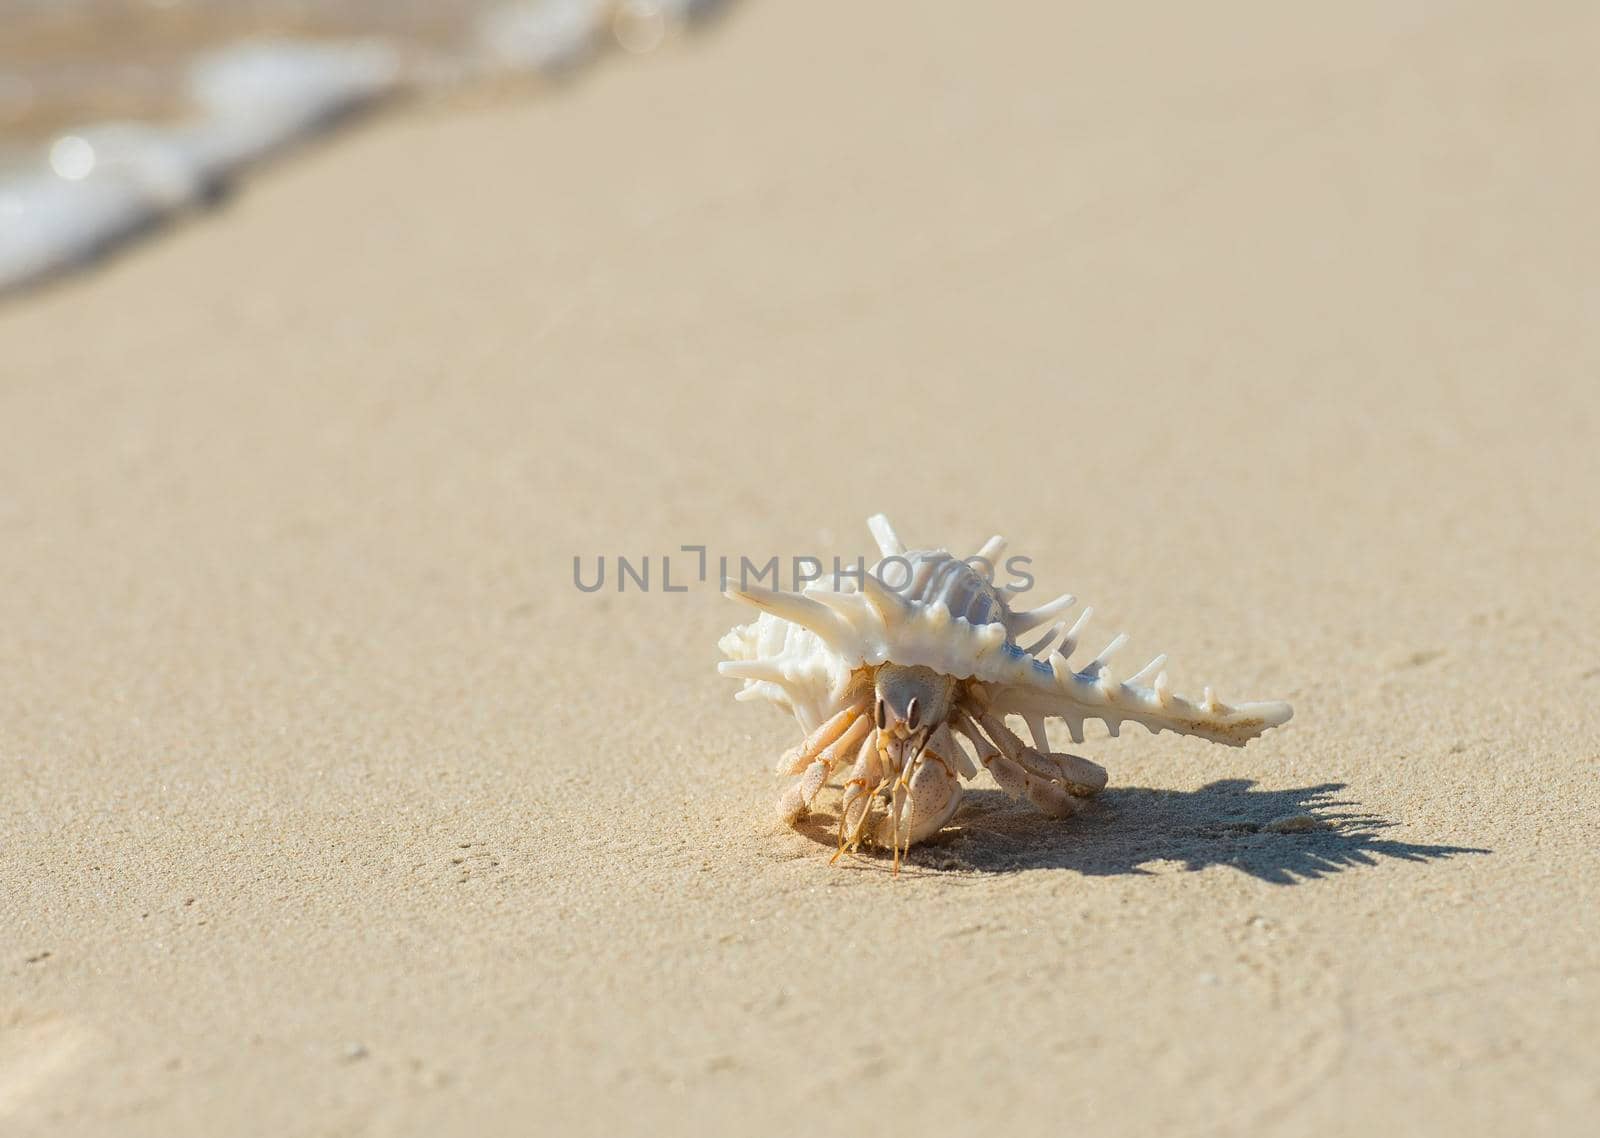 Closeup detail of hermit crab in a white spiky seashell on sandy tropical beach with shadow